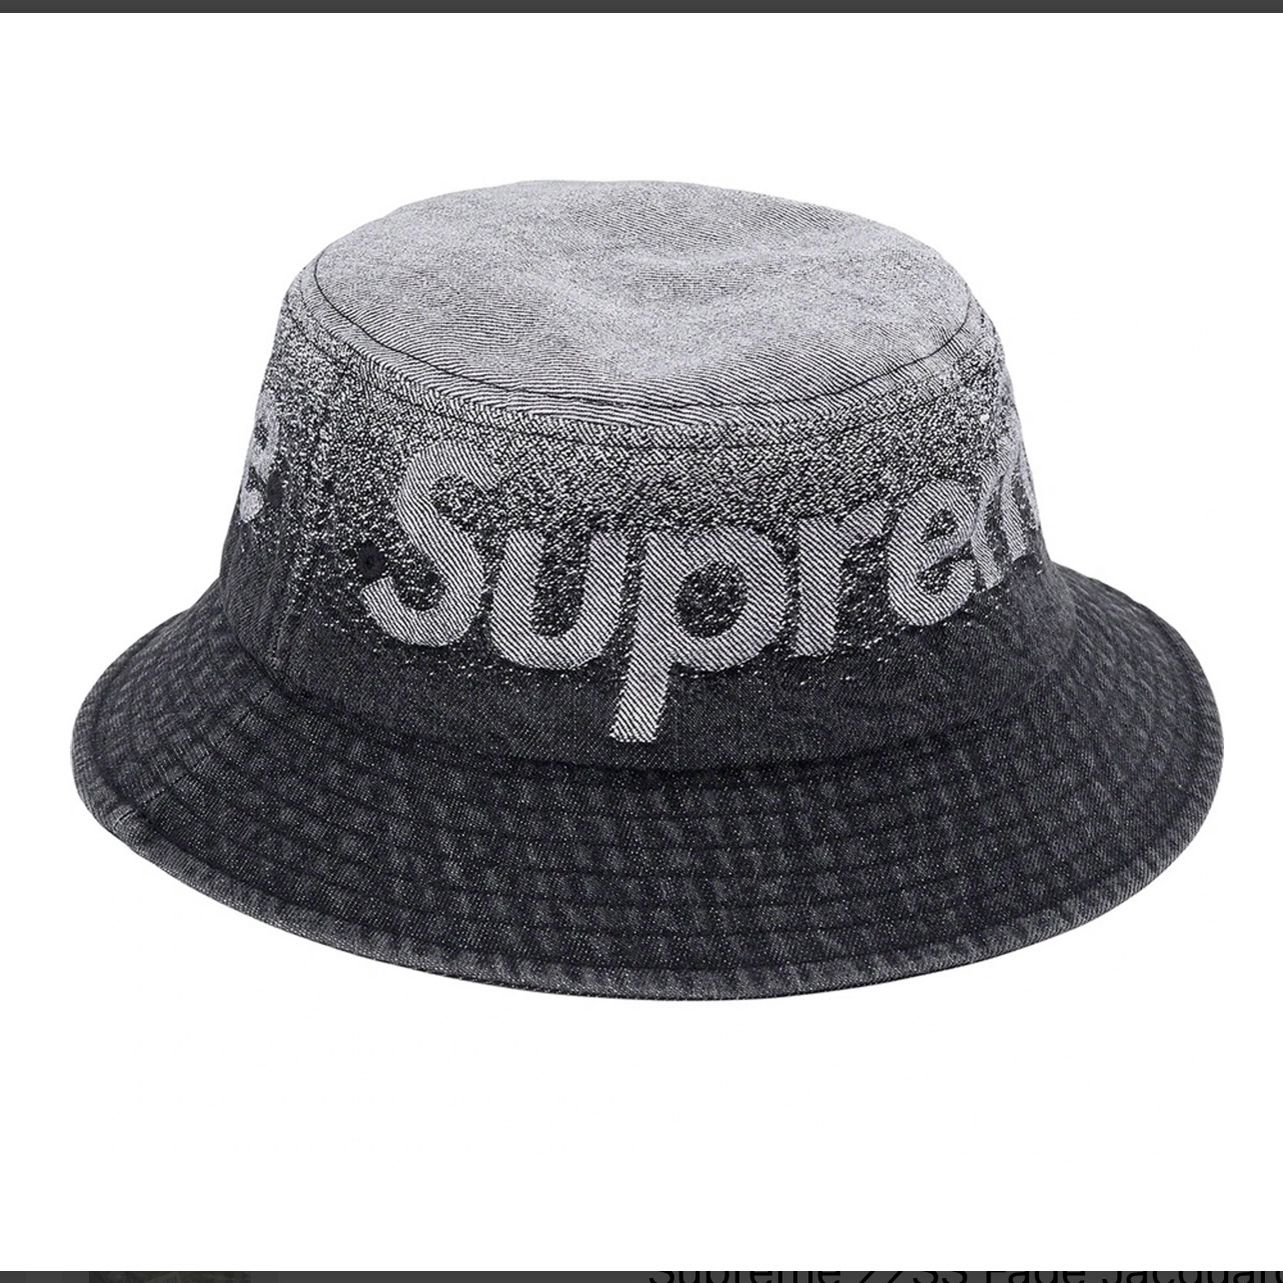 supreme jacquard denim hat available in store and on gallery304